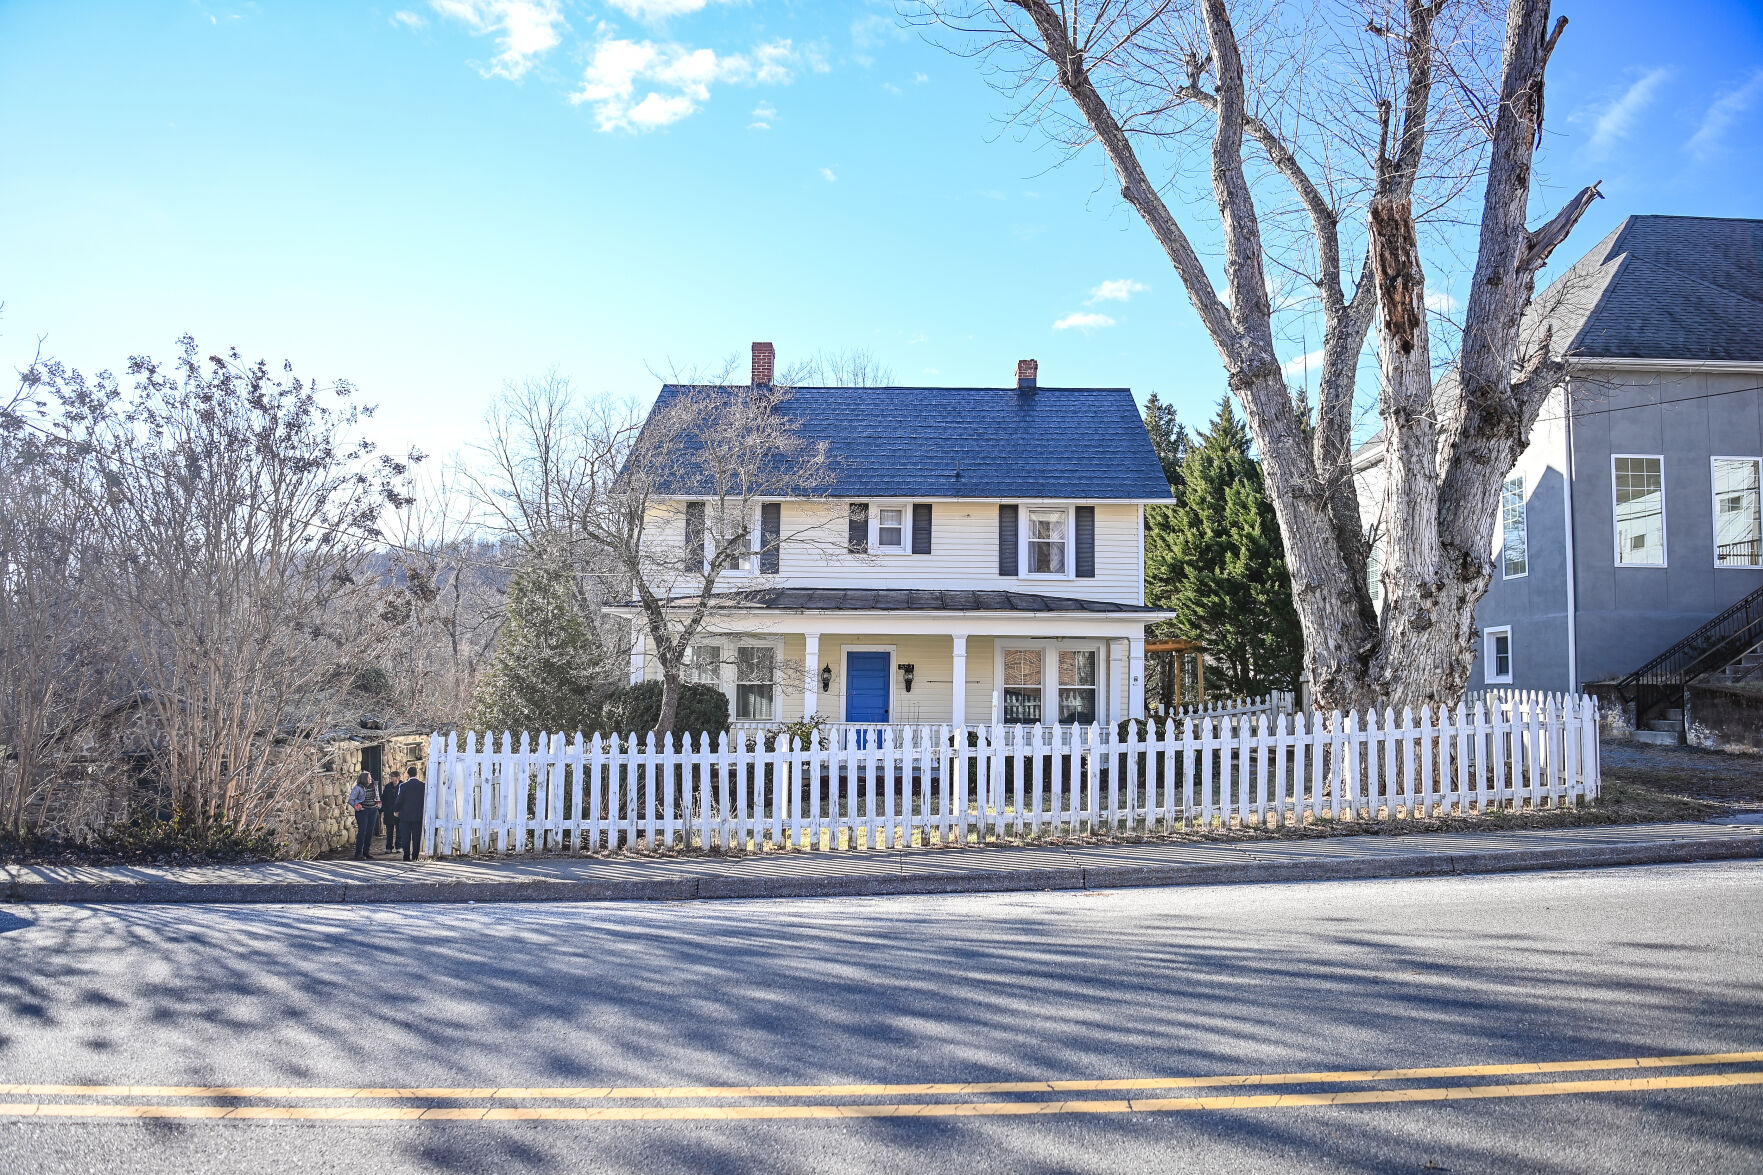 Colorful Lovingston home once housed a colorful family hq image